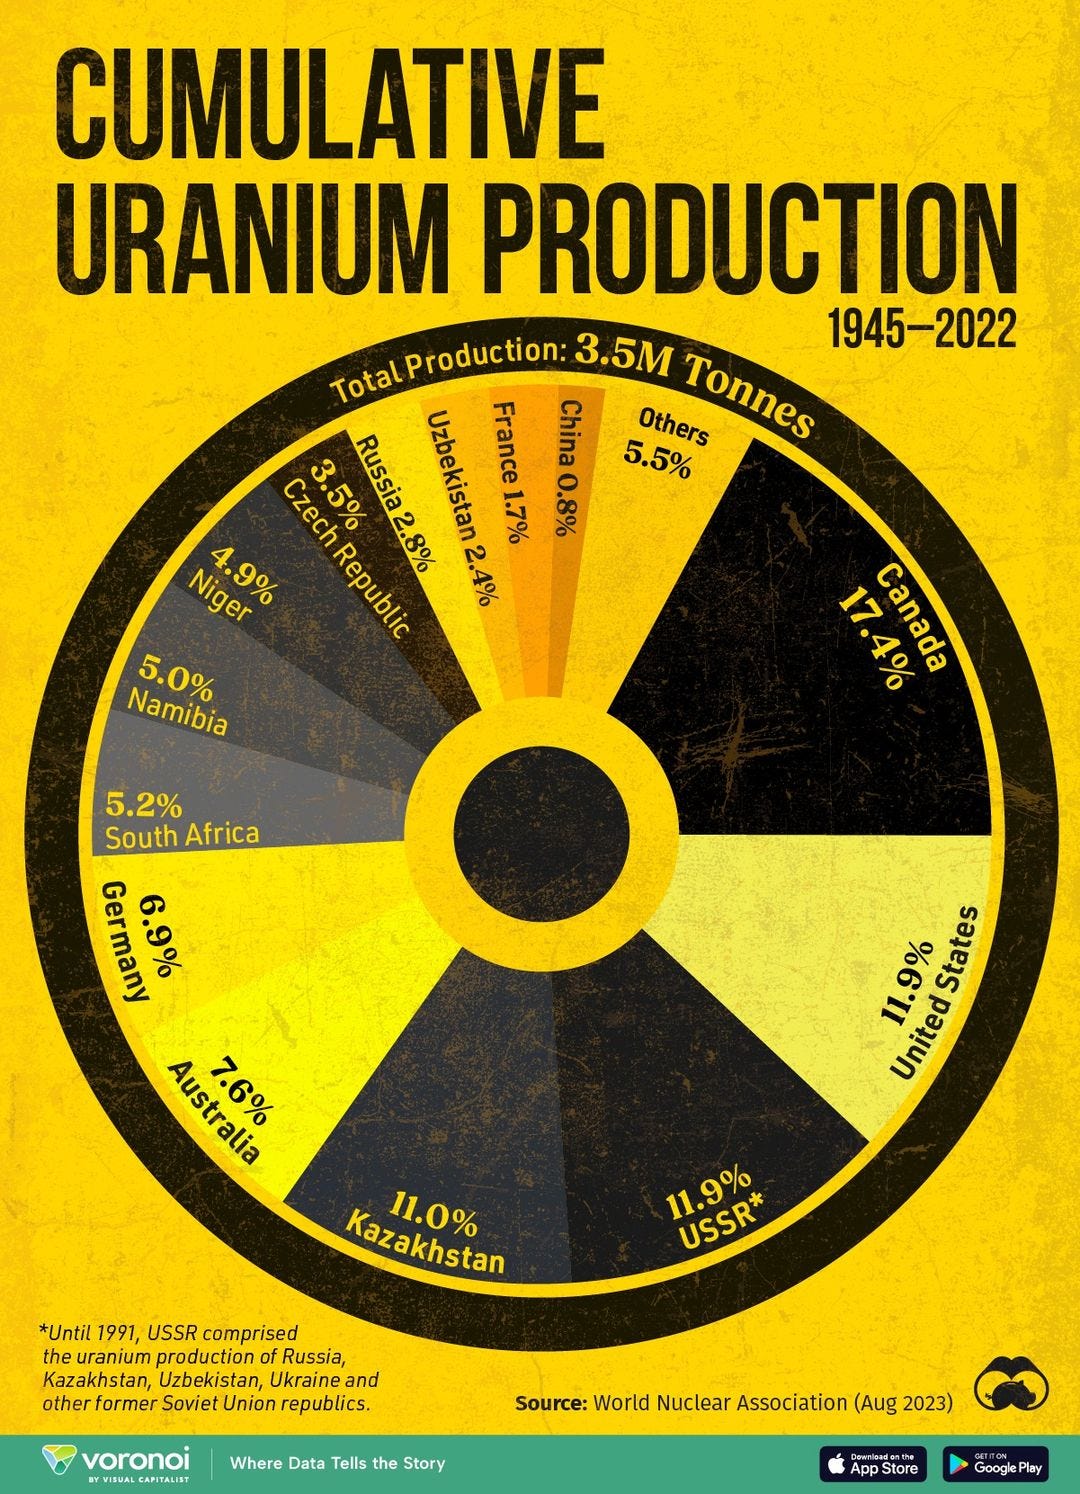 May be a graphic of text that says 'CUMULATIVE URANIUM PRODUCTION roduction: 3.5M 1945-2022 Total TlPin: Russia2.8% Russia Uzbekistan 1.7% 0.8% France China Others Tonnes 3.5% 5.5% Czech Niger 4.9% Republic 2.8% 2.4% Namibia 5.0% %04 epeuen 5.2% South Africa Germany 6.9% Australia 7.6% 11.9% States United Kazakhstan 11.0% 11.9% USSR* *Until 1991, USSR comprised theuranium production Rusia Kazakhstan, Uzbekistan, Ukraine and other former Soviet Union republics. voronoi Where Data Tells the Story Source: World Nuclear Association (Aug 2023) AppStre 'oo'Pl'